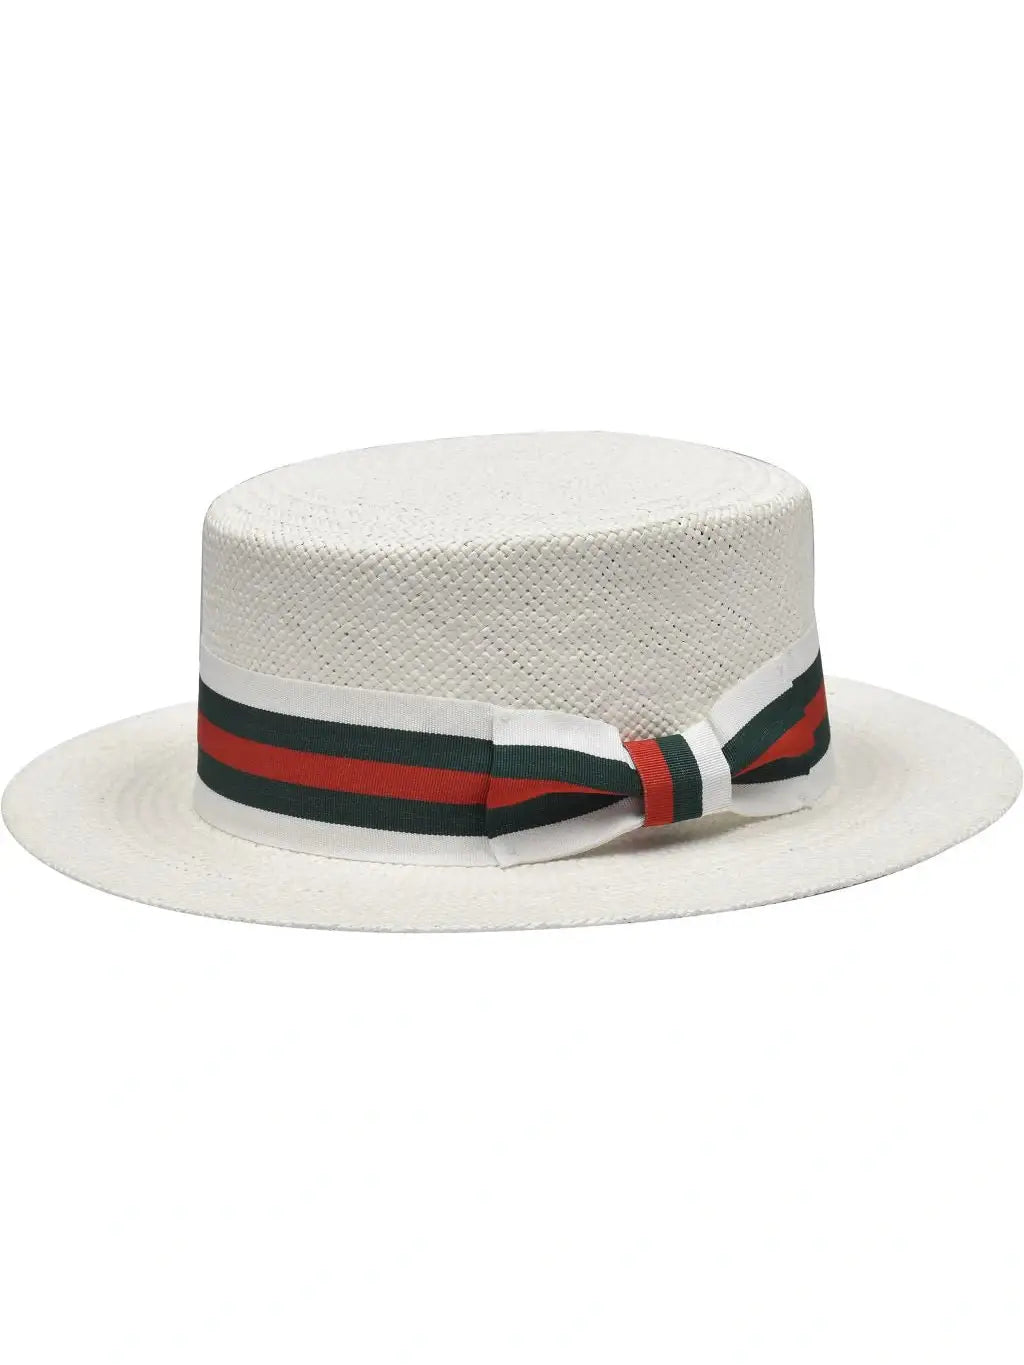 Mens The Boater White Straw Hat